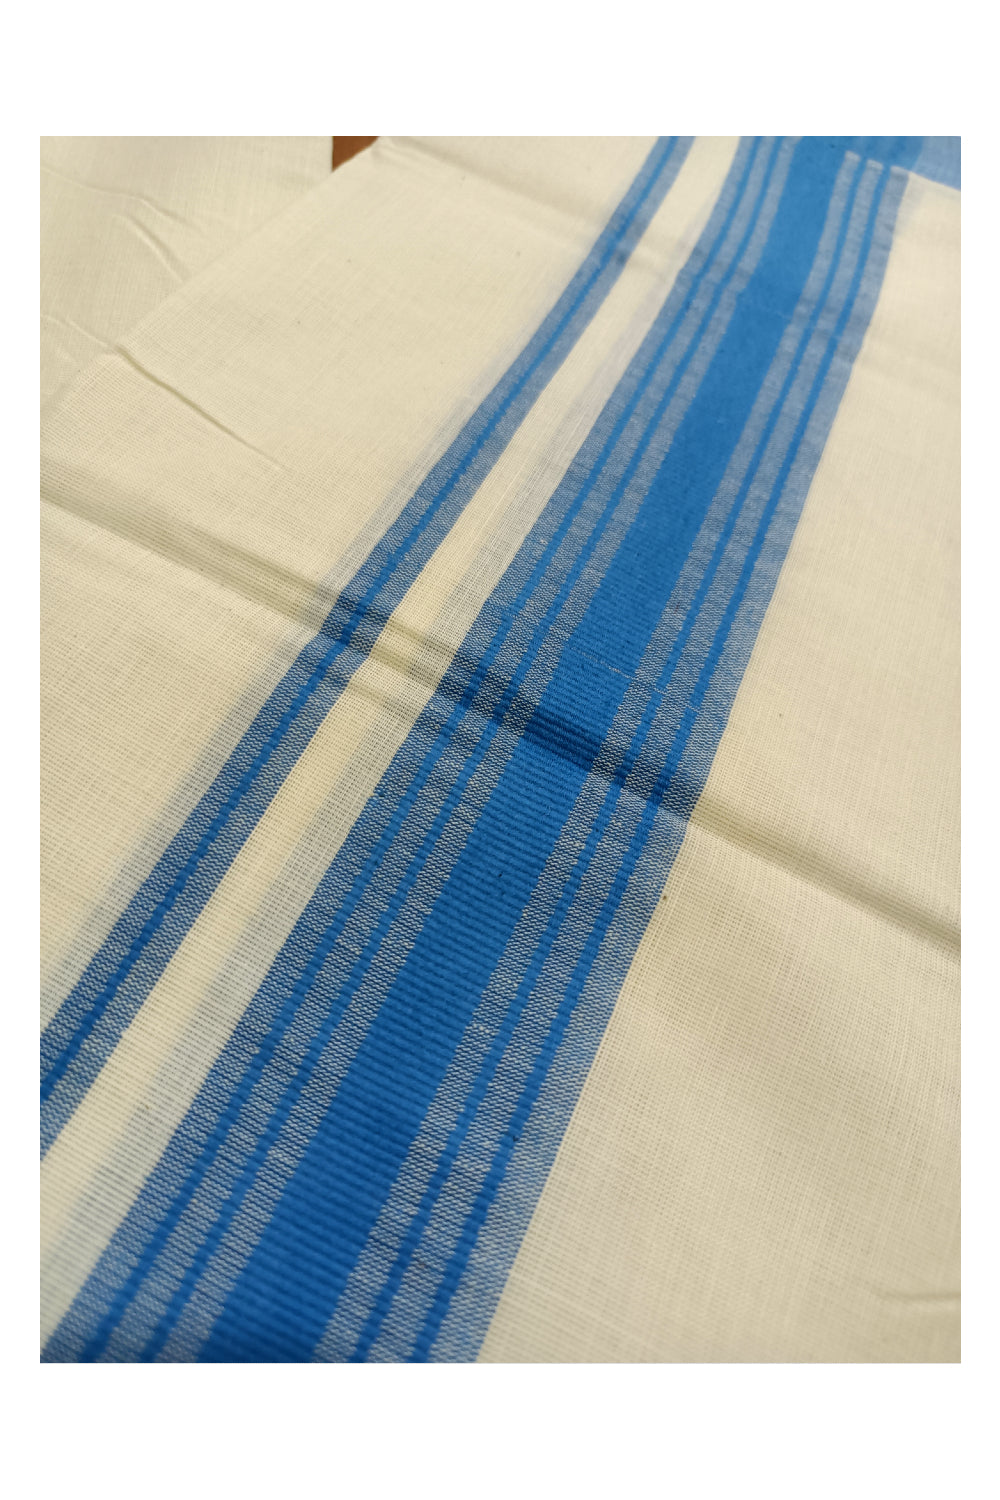 Off White Kerala Double Mundu with Blue Lines Border (South Indian Dhoti)